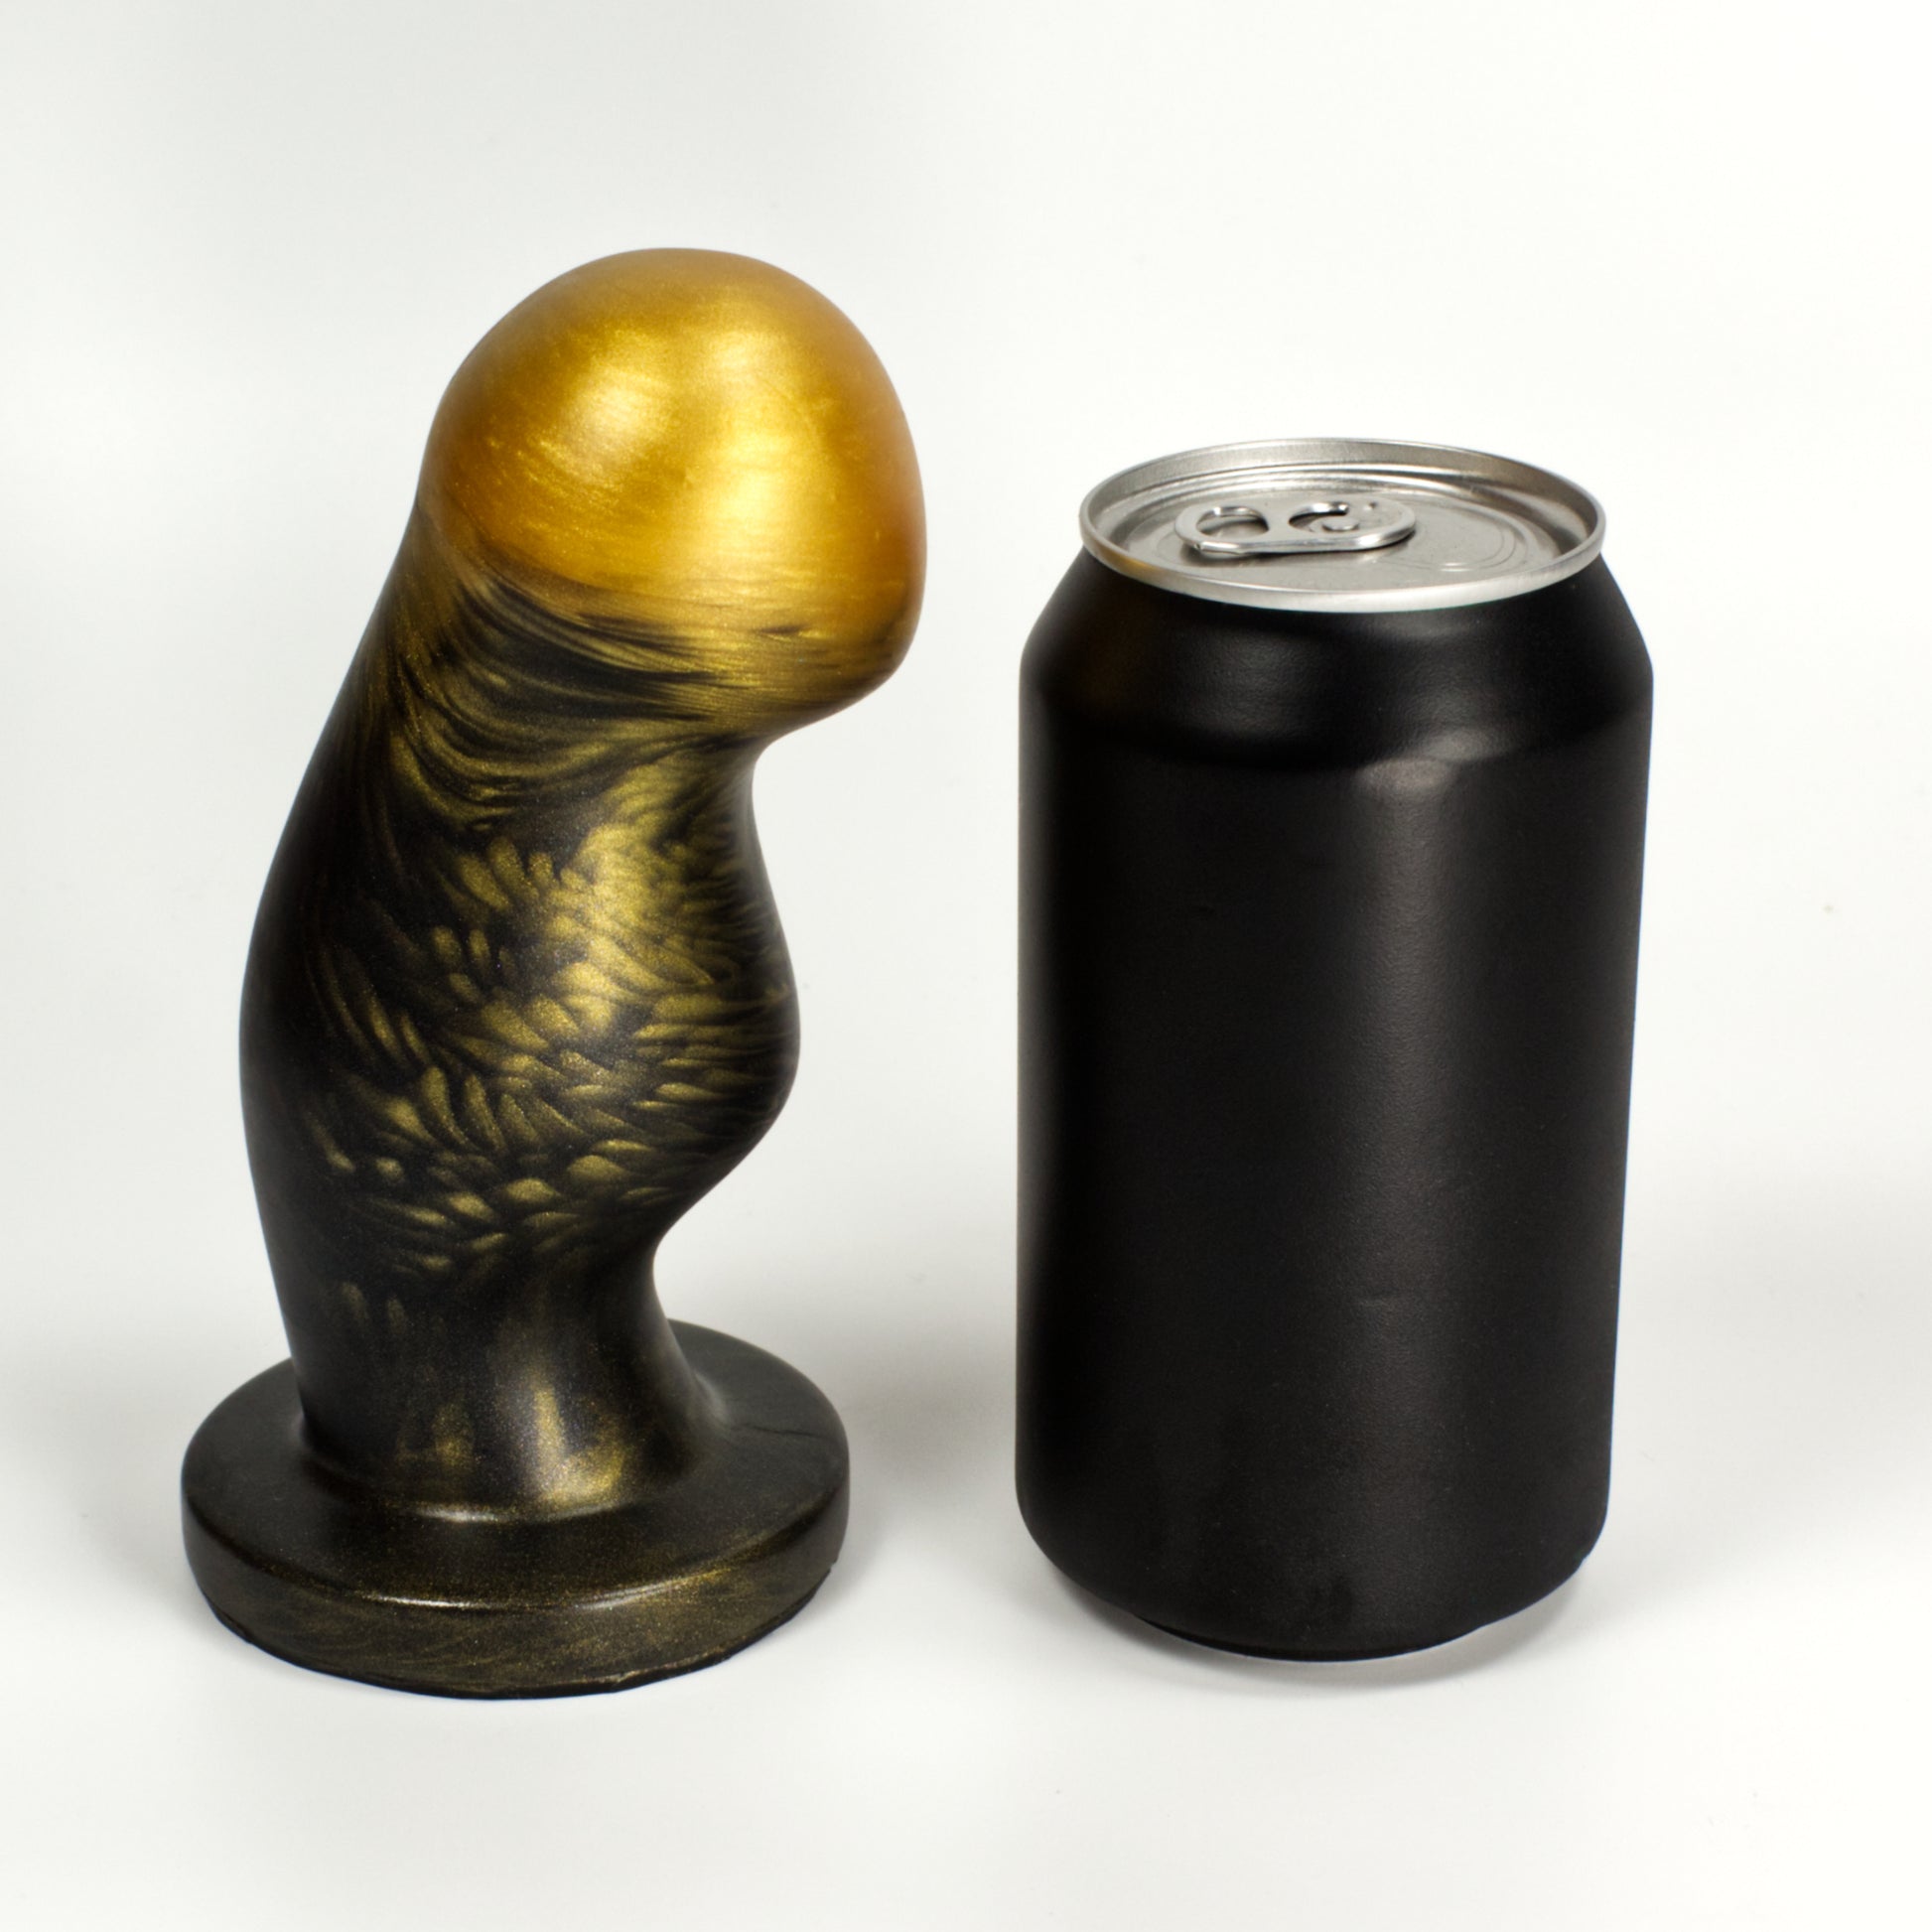 Side view of the Ally Large next to a standard soda can, showing that the toy is a little taller than the can and nearly as wide at the middle bump.